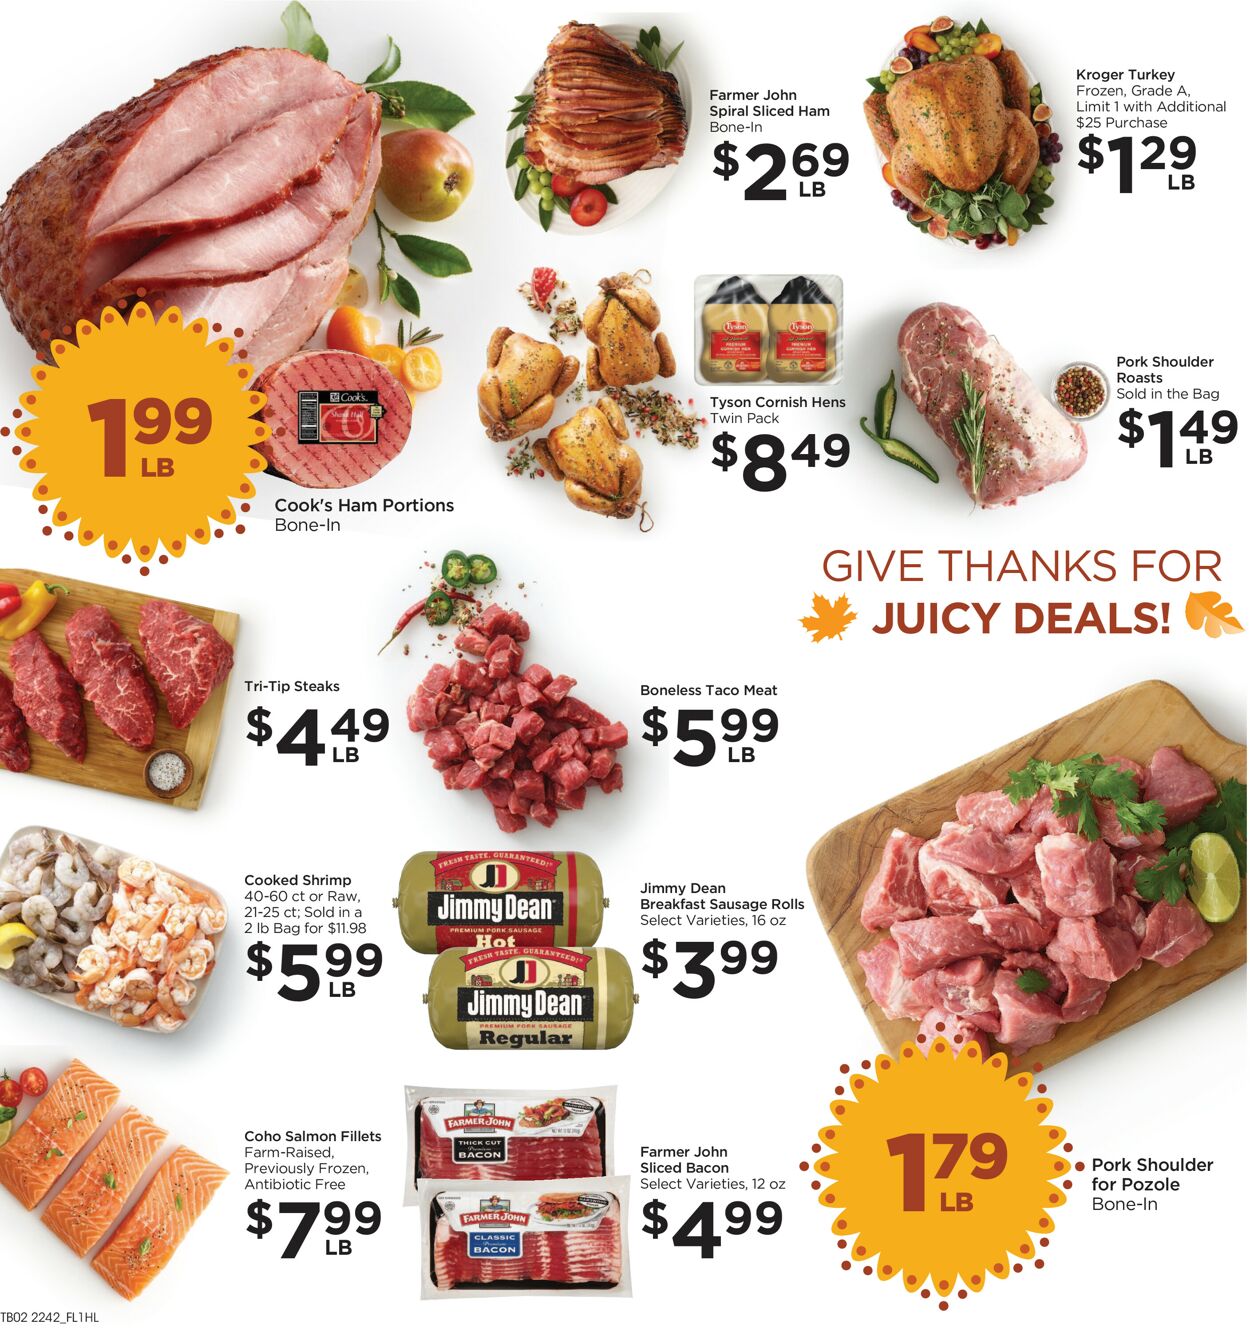 Catalogue Food 4 Less from 11/16/2022